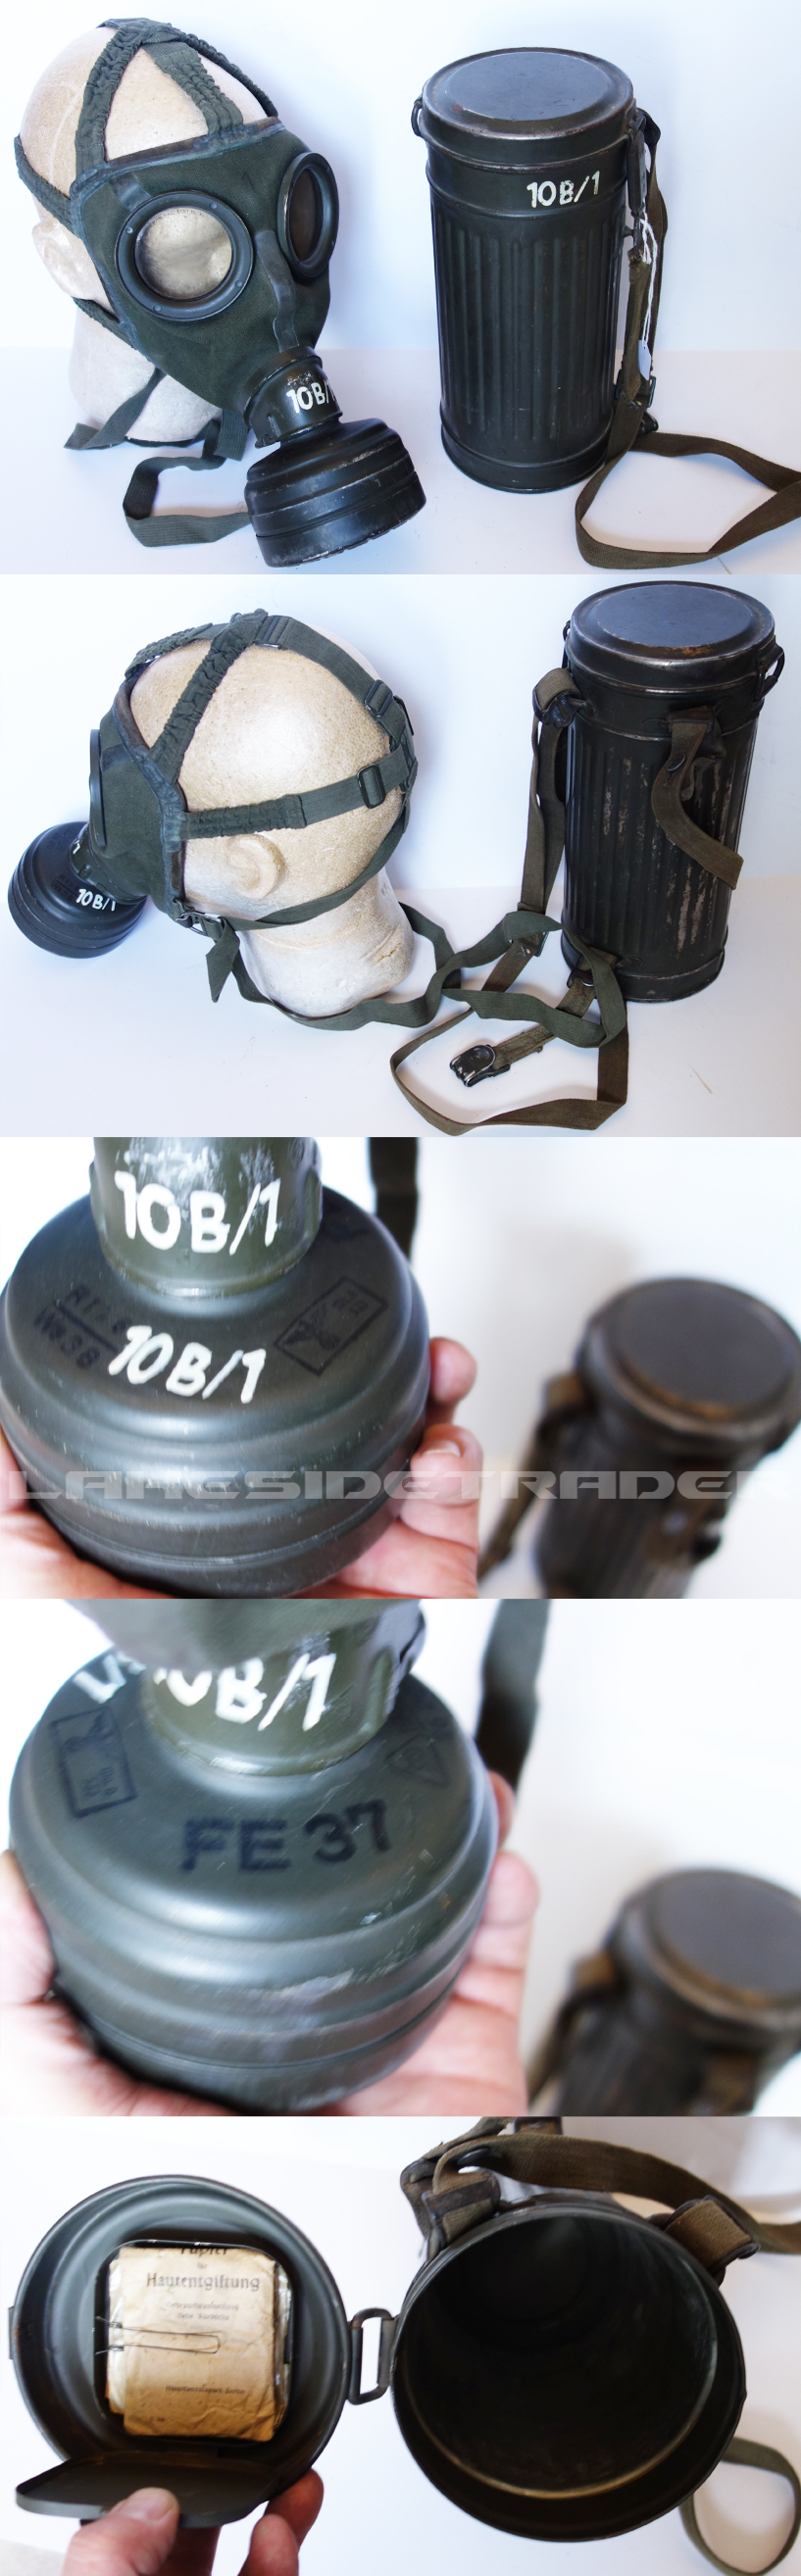 Gas Mask & Canister